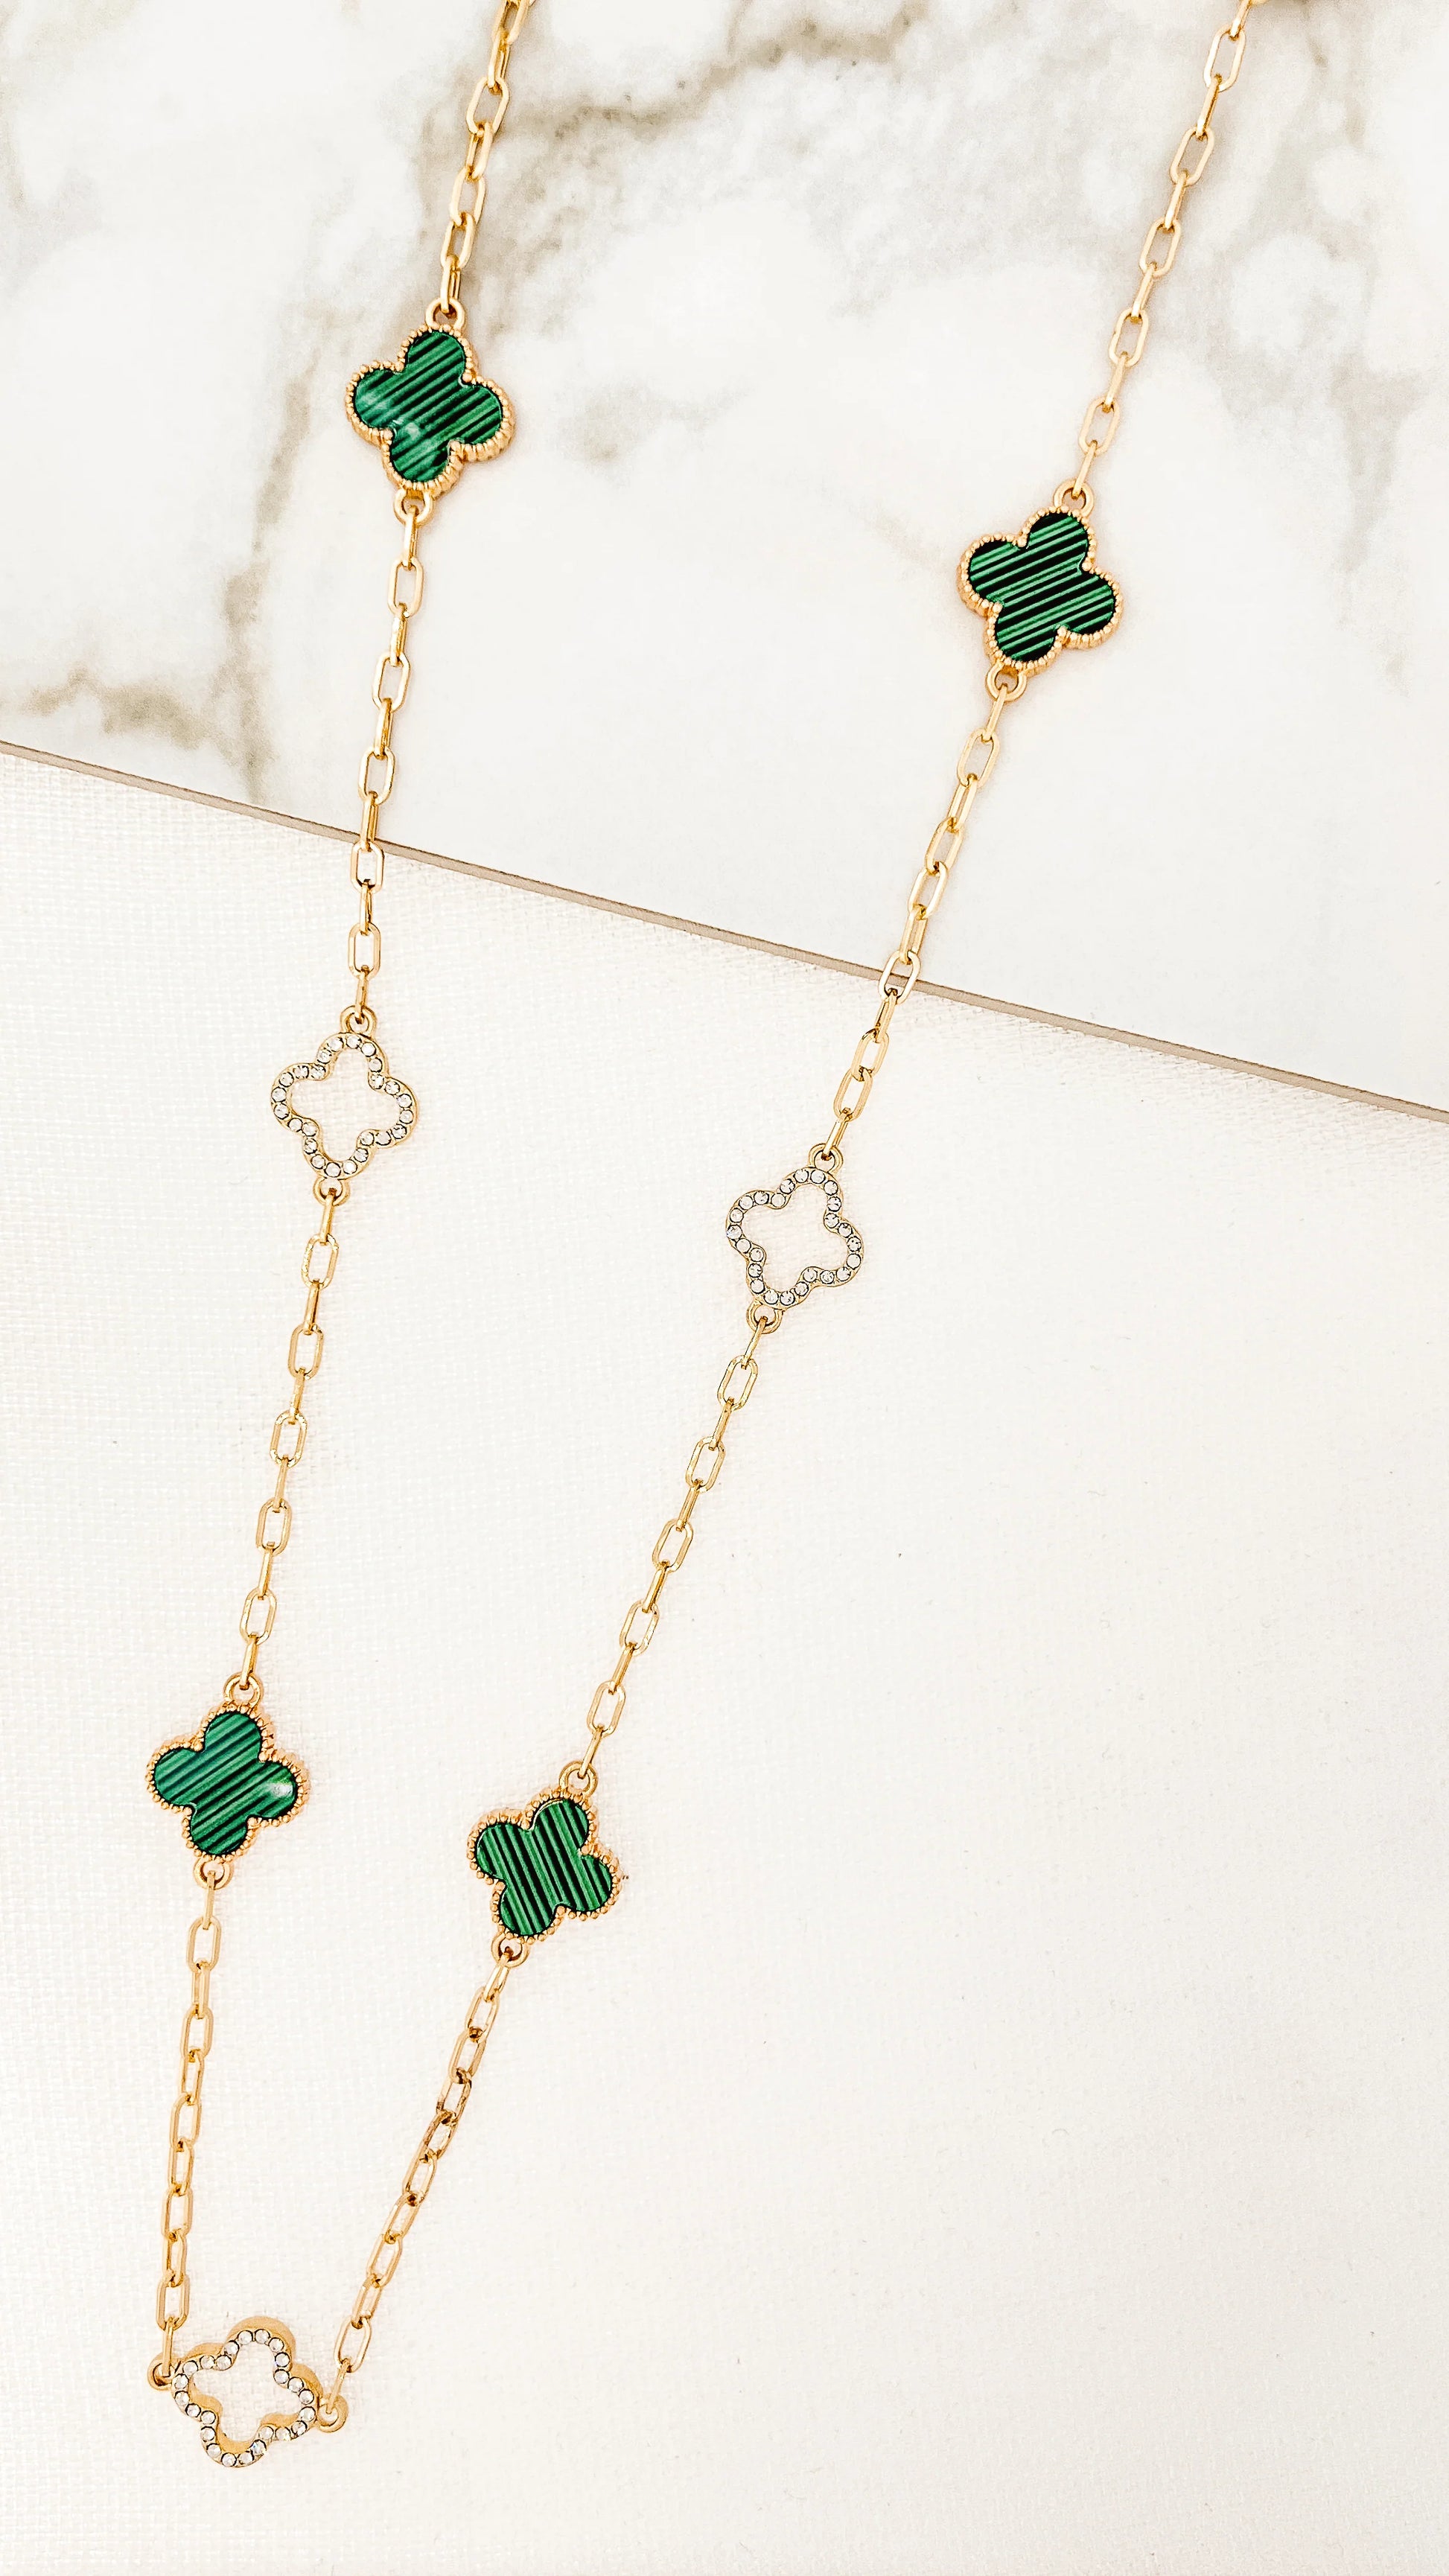 Envy Long Gold Necklace with Diamante and Green Clovers